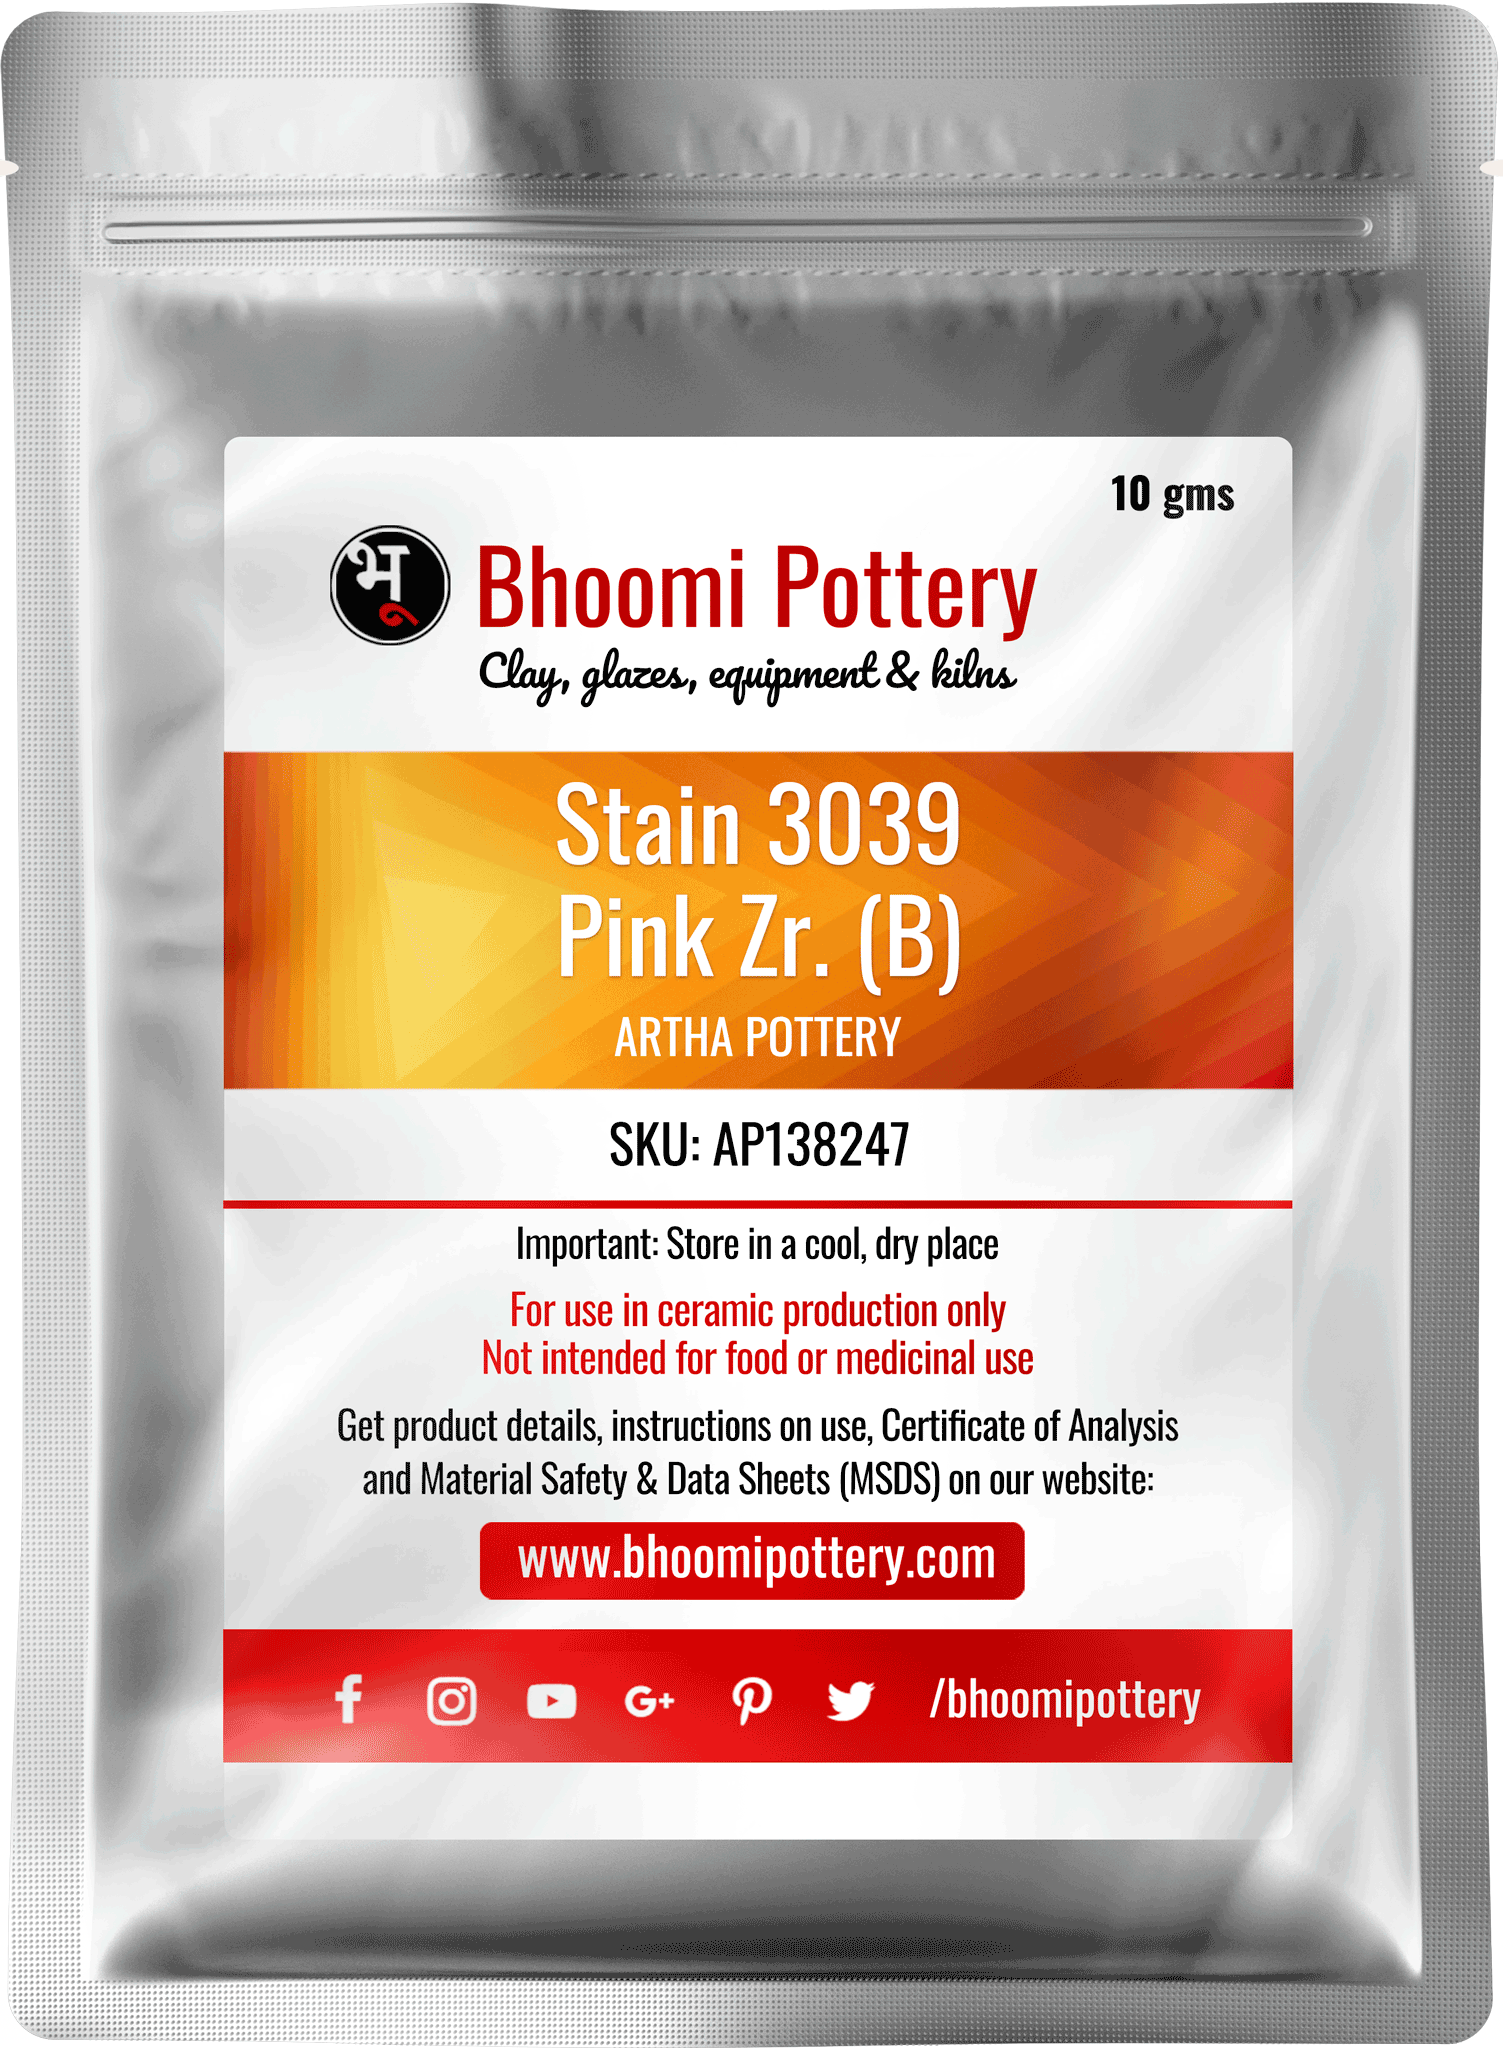 Artha Pottery Stain 3039 Pink Zr. (B) 100 gms for sale in India - Bhoomi Pottery